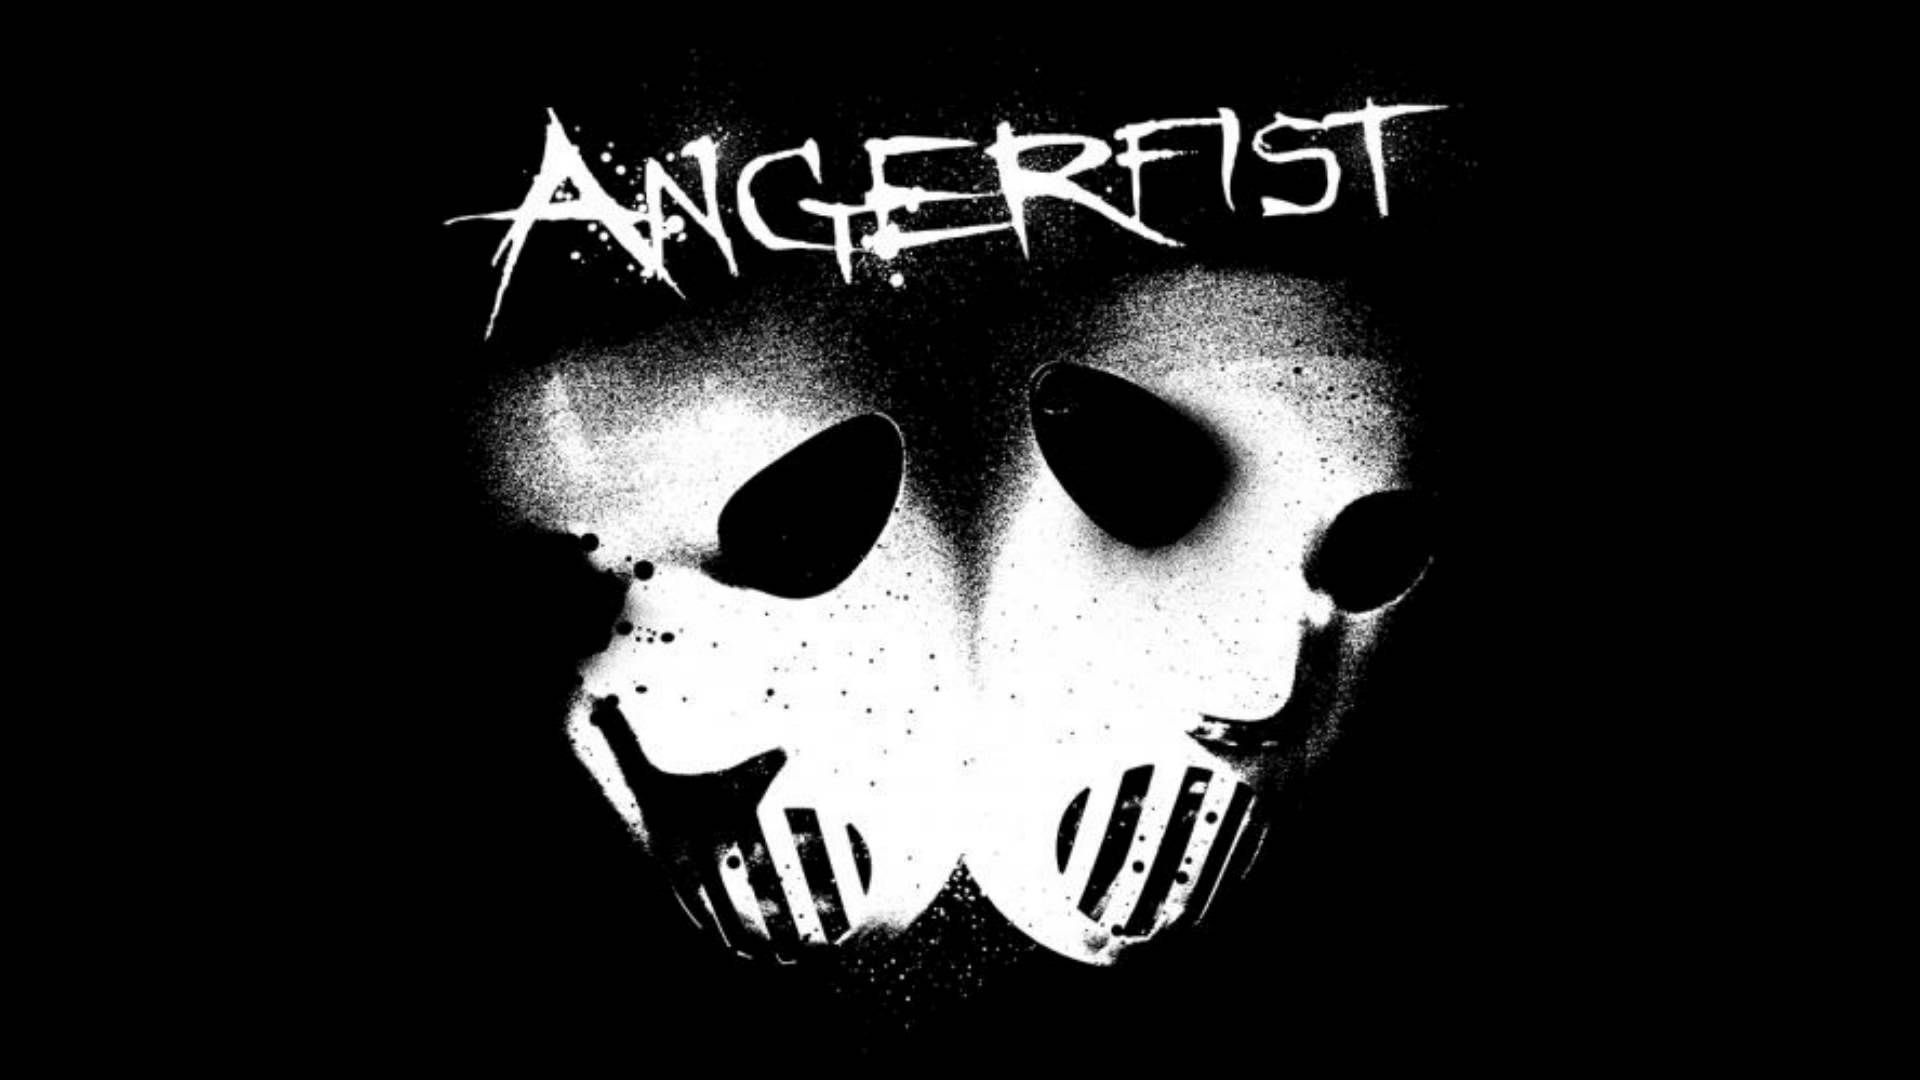 17 29: Angerfist Wallpaper, Angerfist HD Quality Background